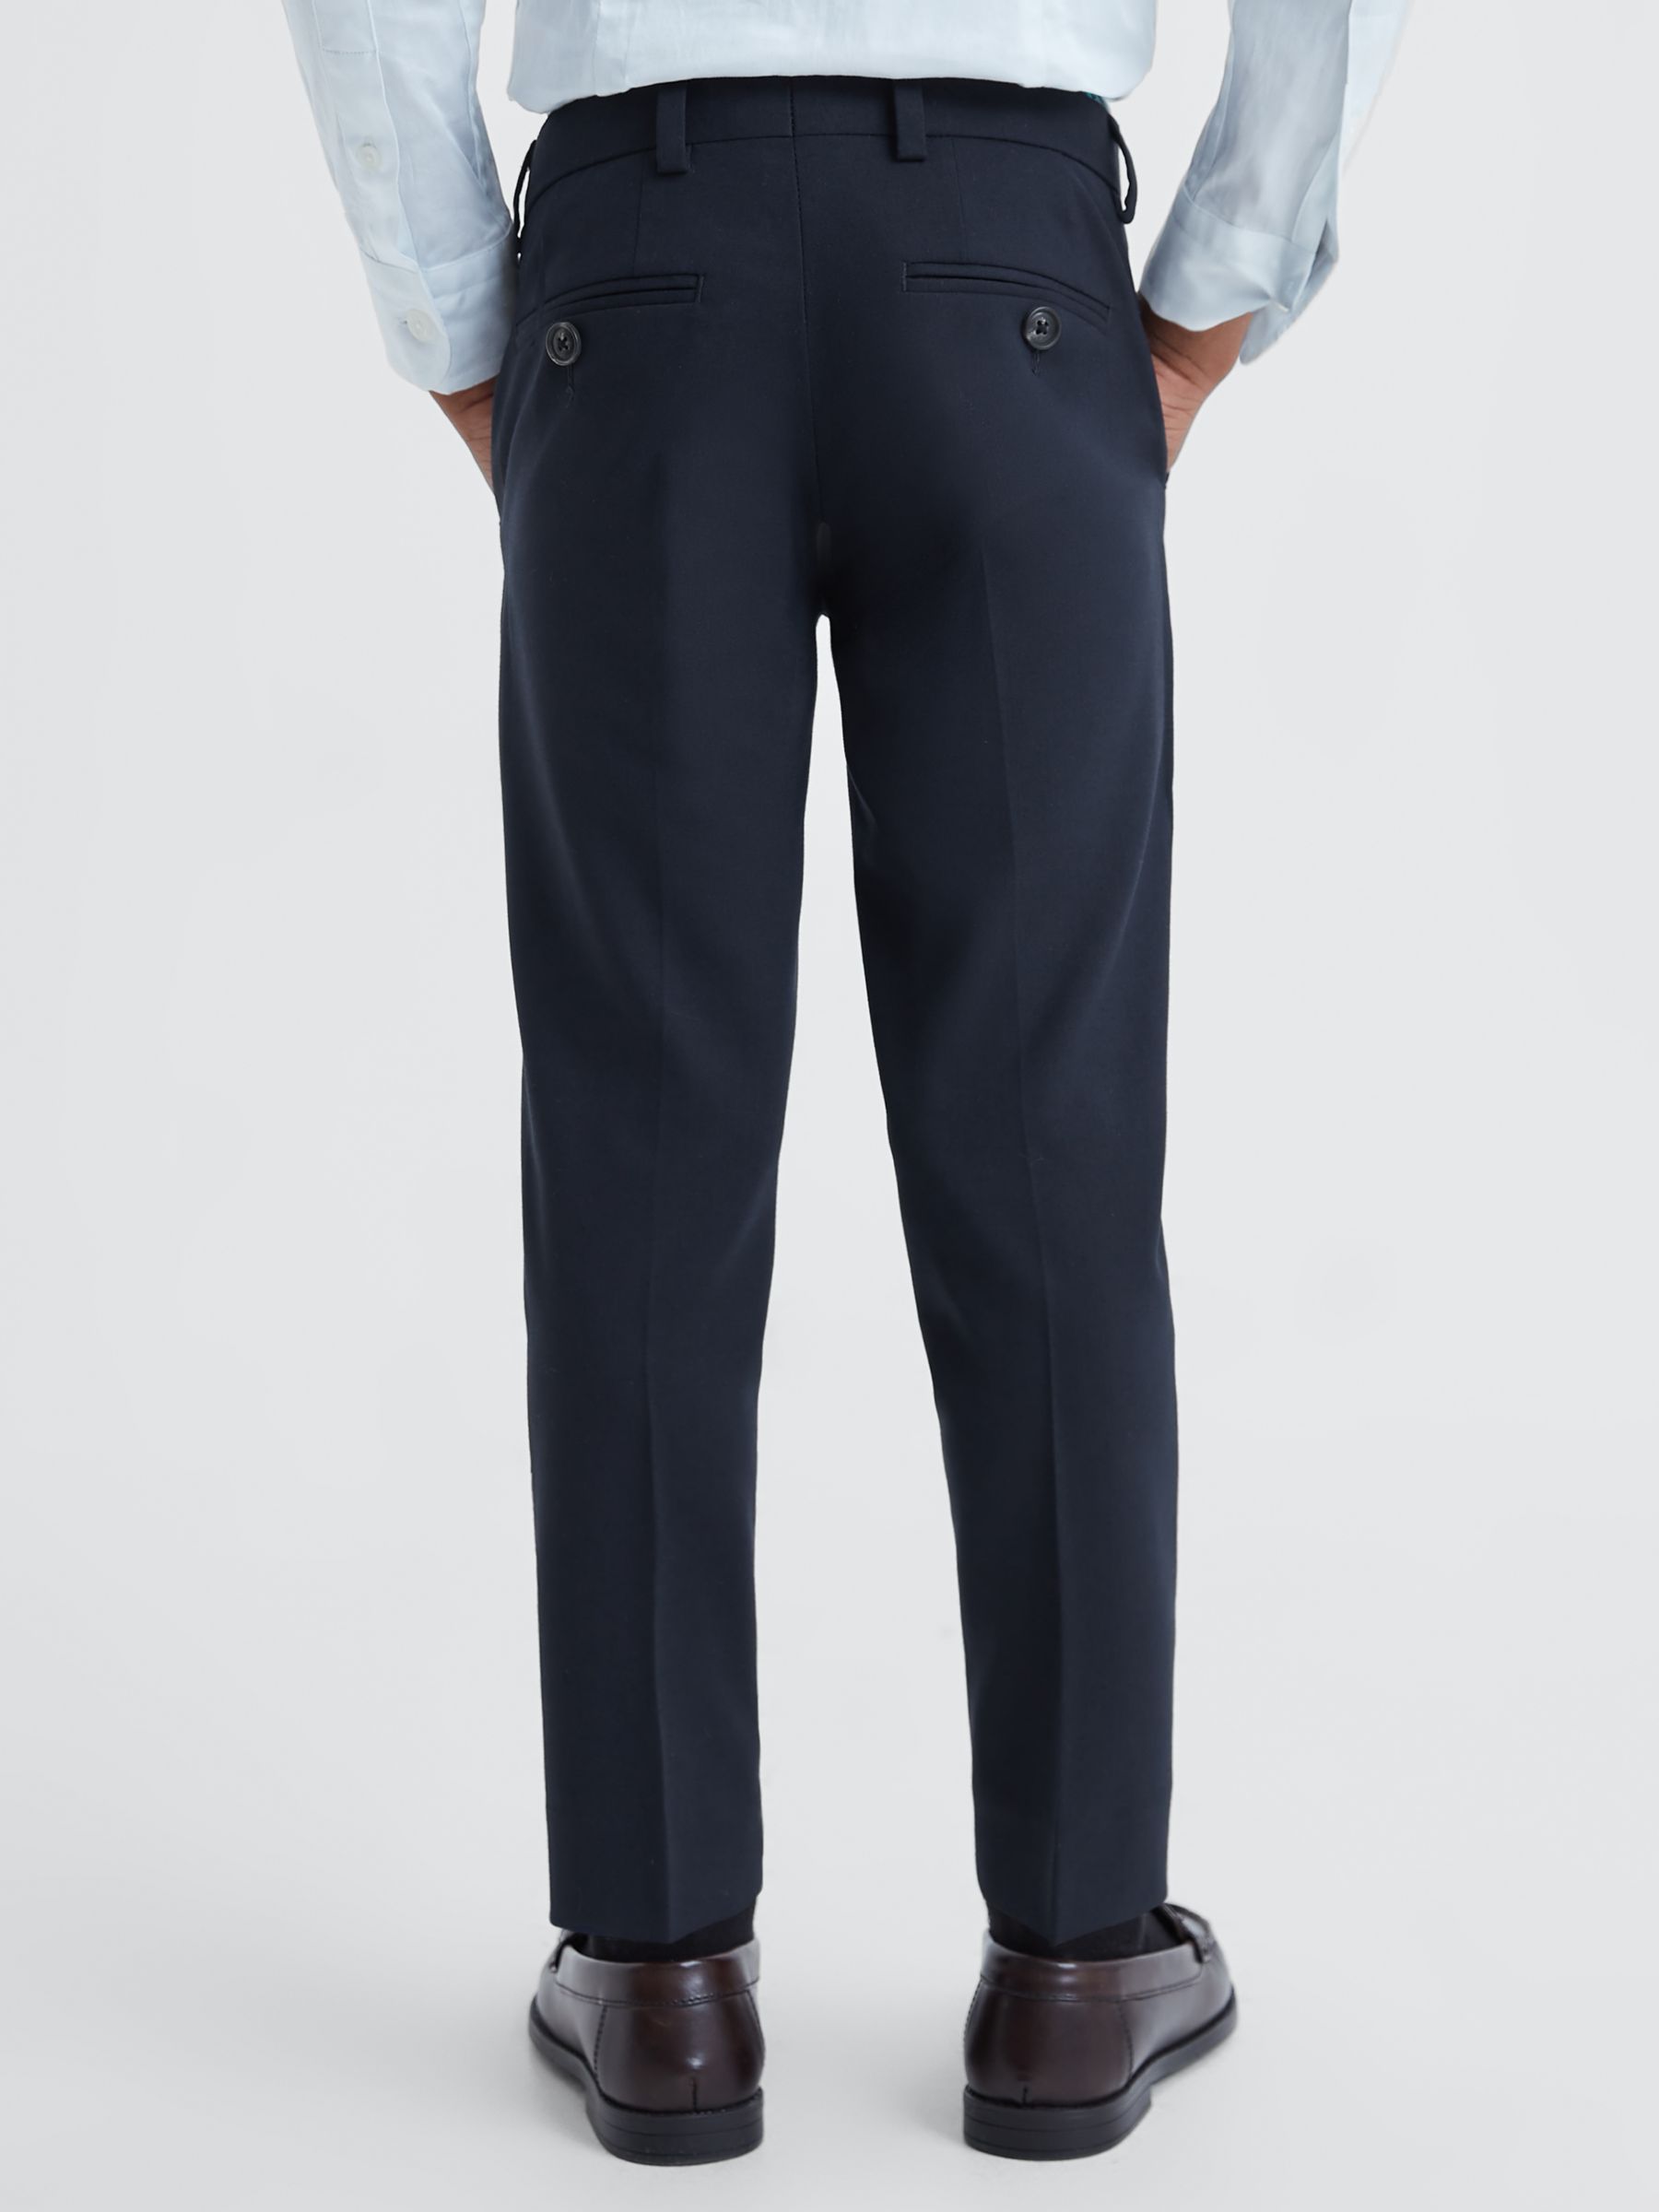 Reiss Kids' Hope Wool Blend Tailored Trousers, Navy, 13-14 years